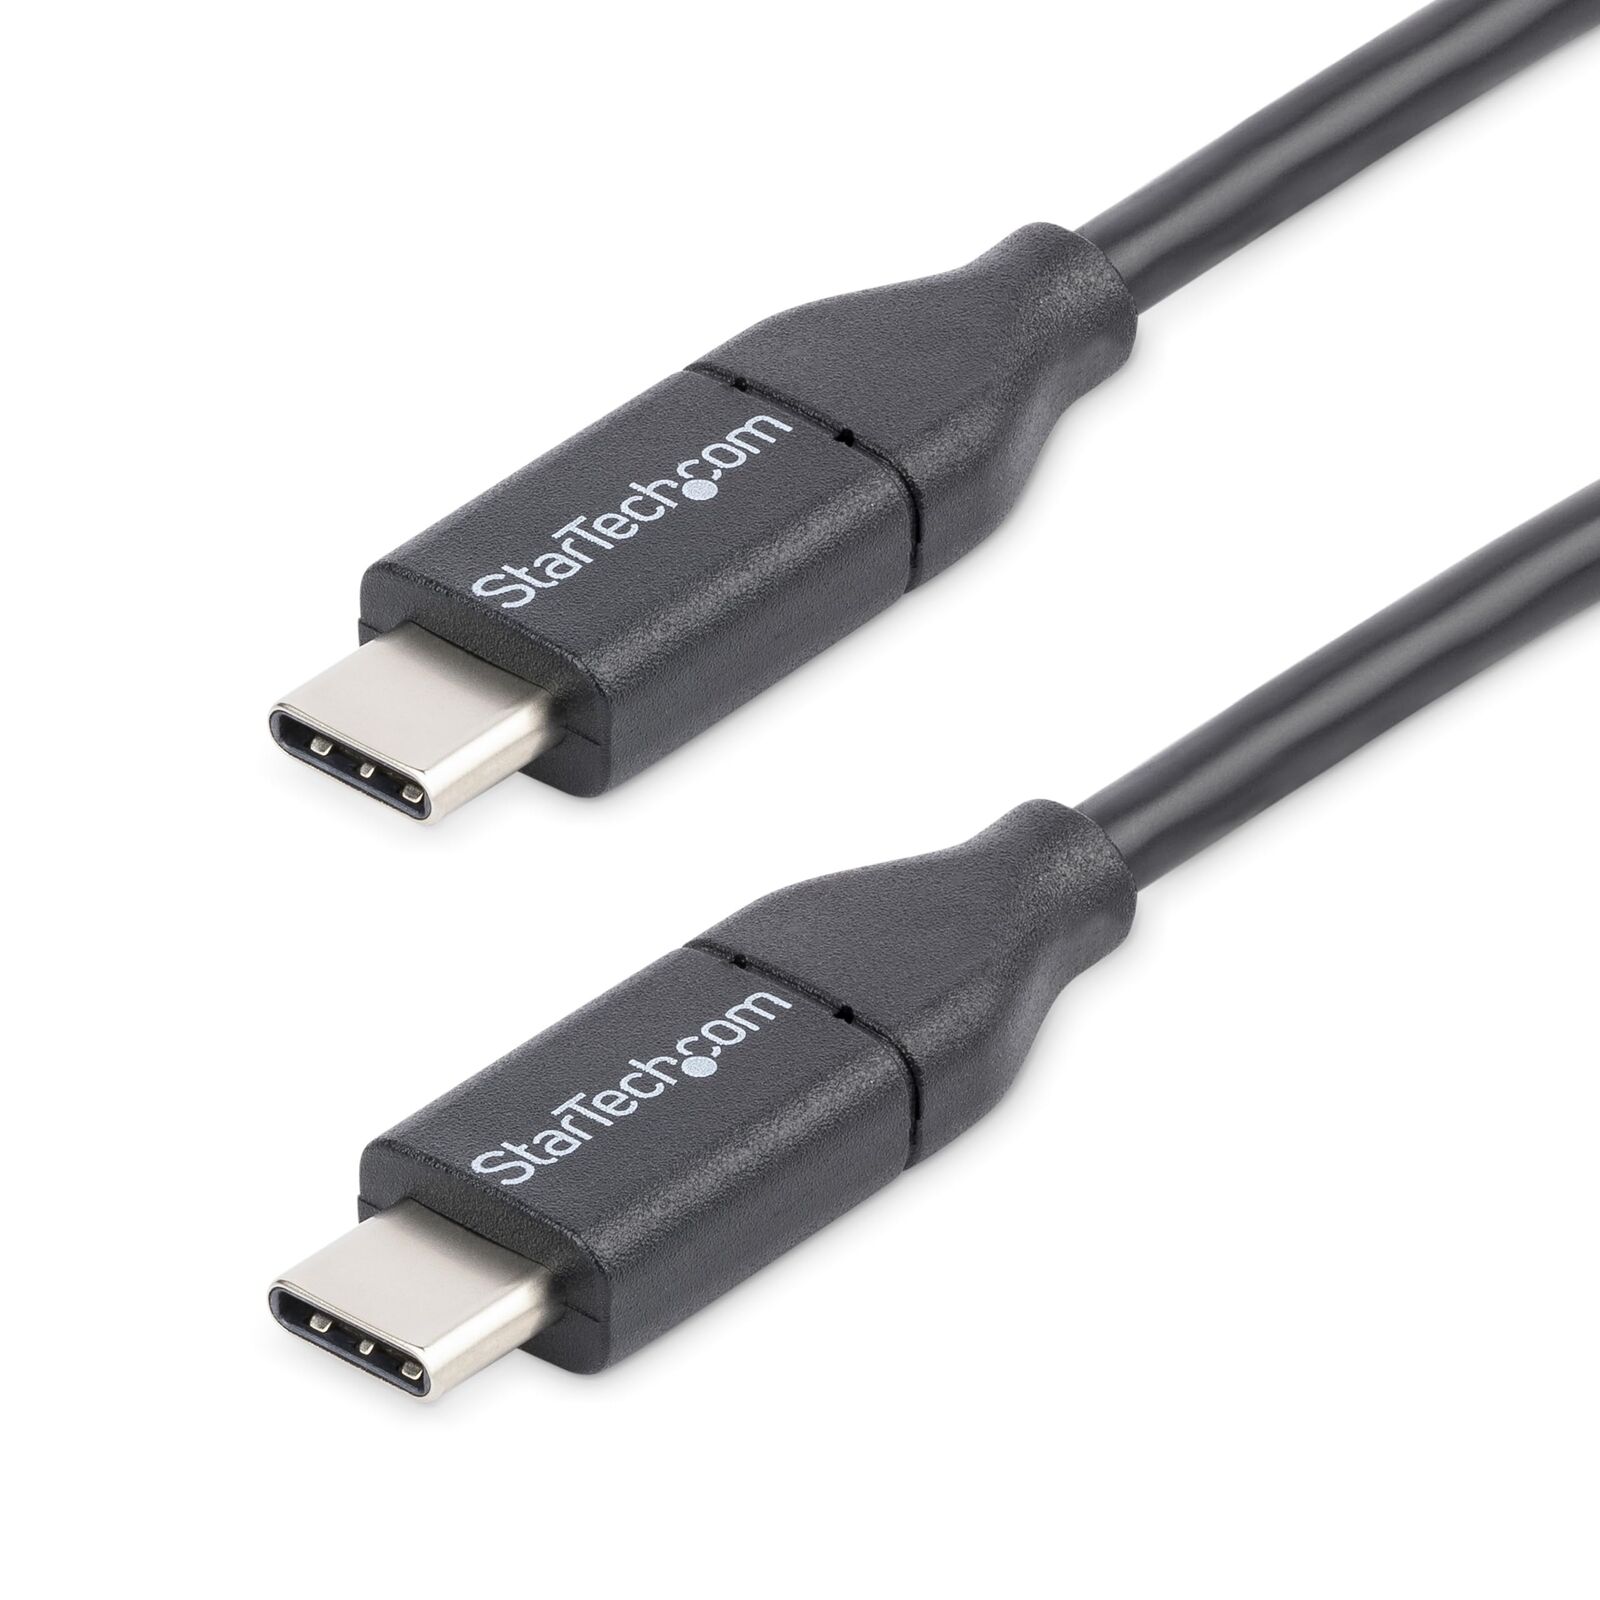 StarTech.com USB C to USB C Cable - 3m / 10 ft - USB Cable Male to Male - USB-C 